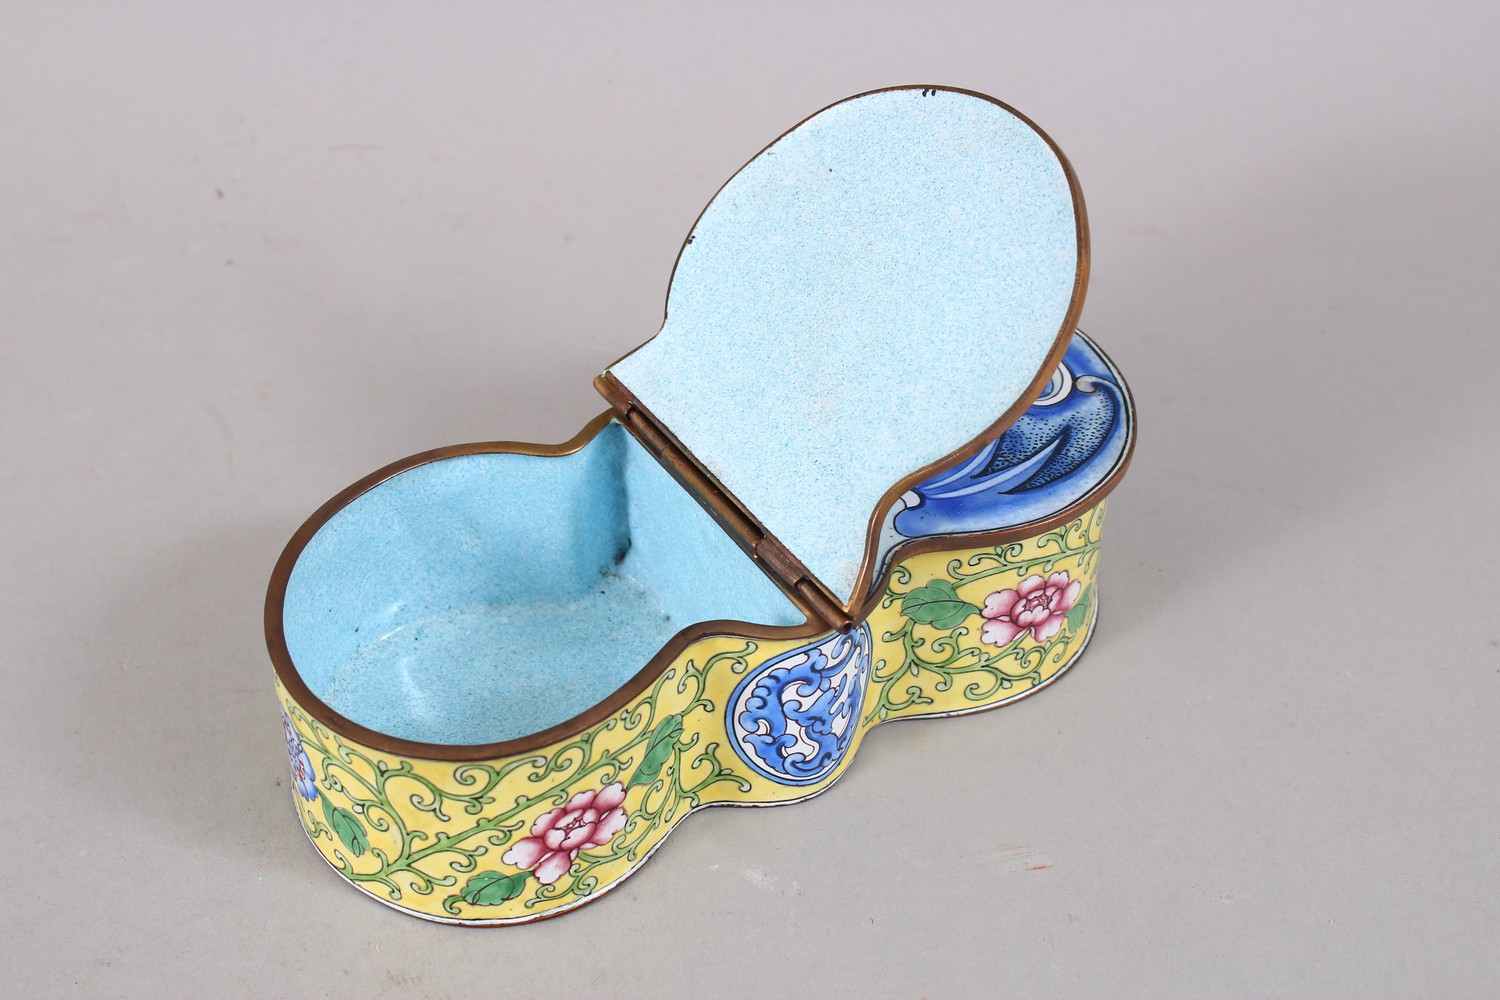 A GOOD 19TH / 20TH CENTURY CHINESE CANTON ENAMEL HINGED & LIDDED BOX IN THE FORM OF A BAT, with - Image 2 of 4